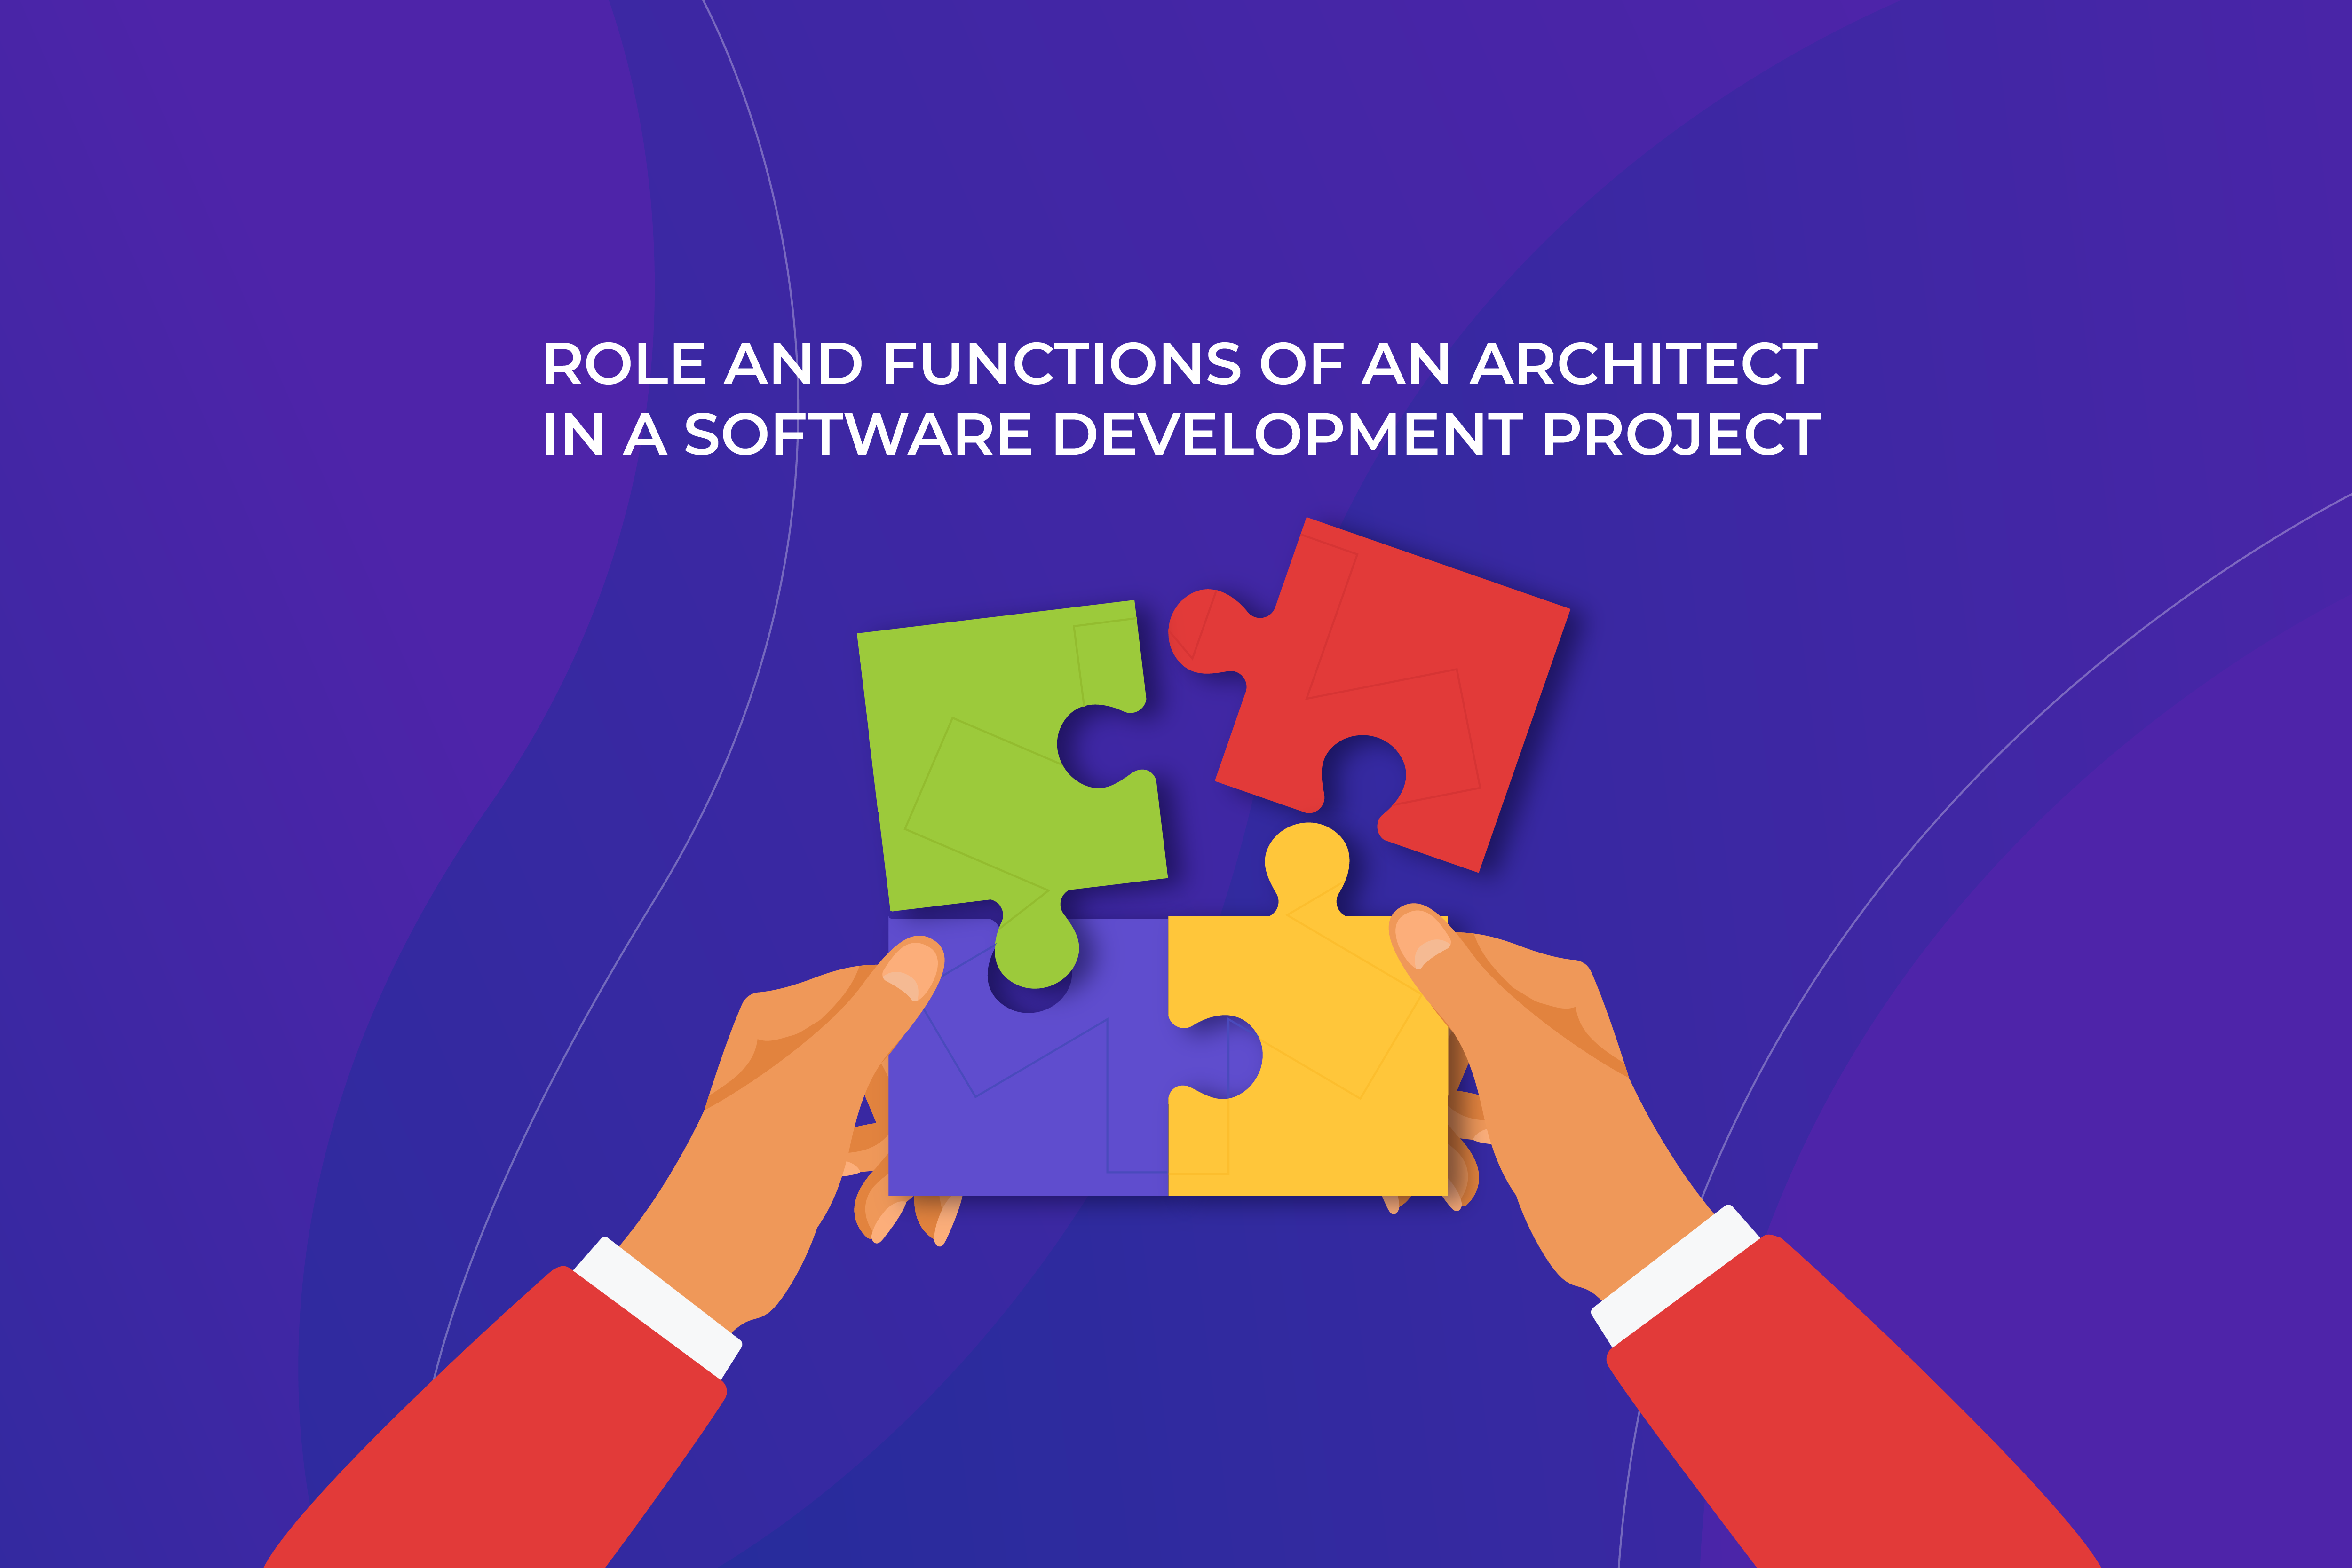 Role and functions of an architect in a software development project